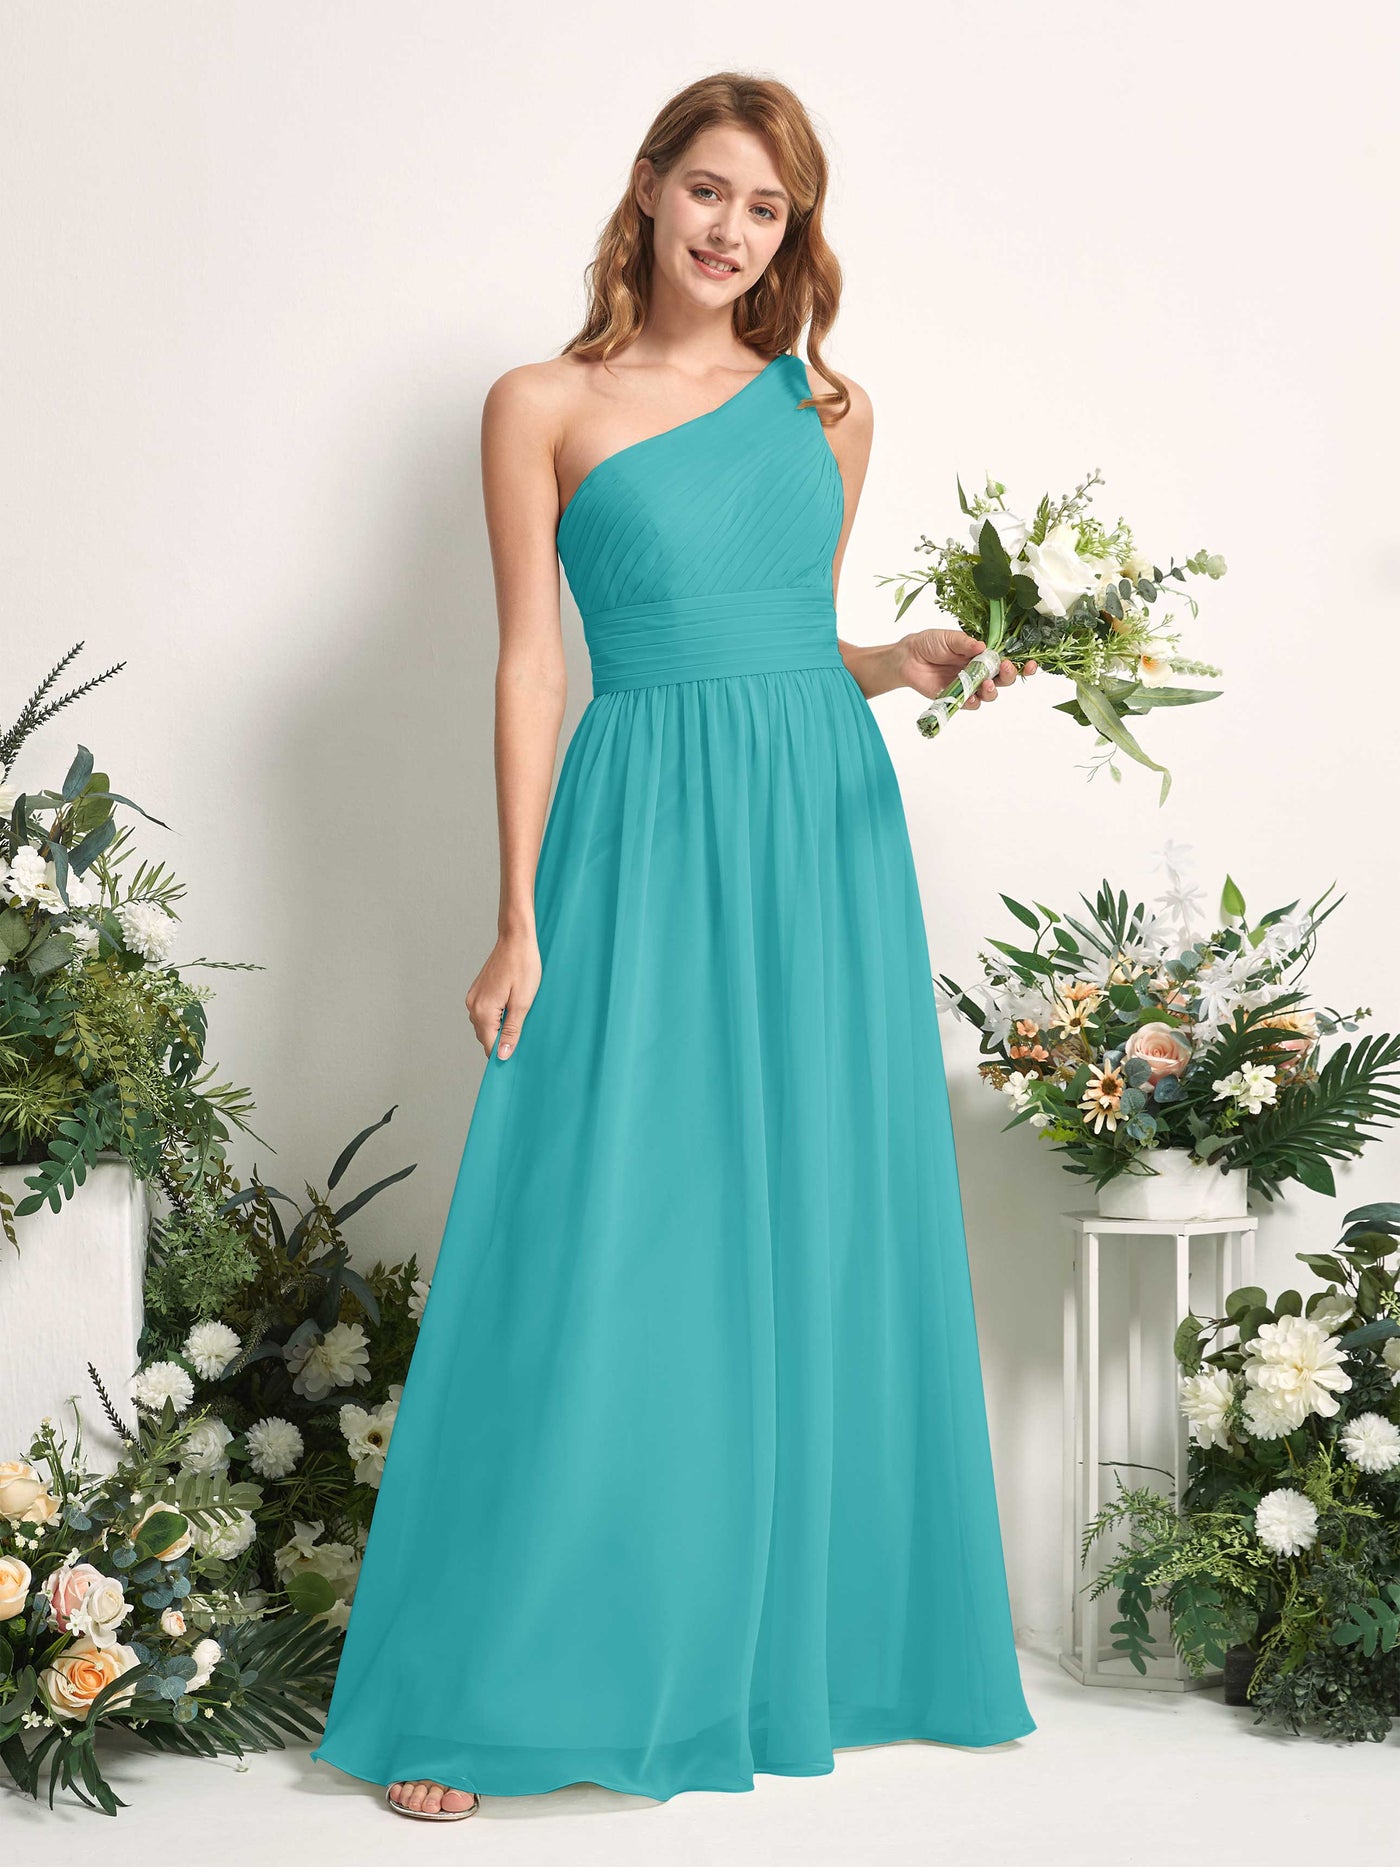 Bridesmaid Dress A-line Chiffon One Shoulder Full Length Sleeveless Wedding Party Dress - Turquoise (81226723)#color_turquoise